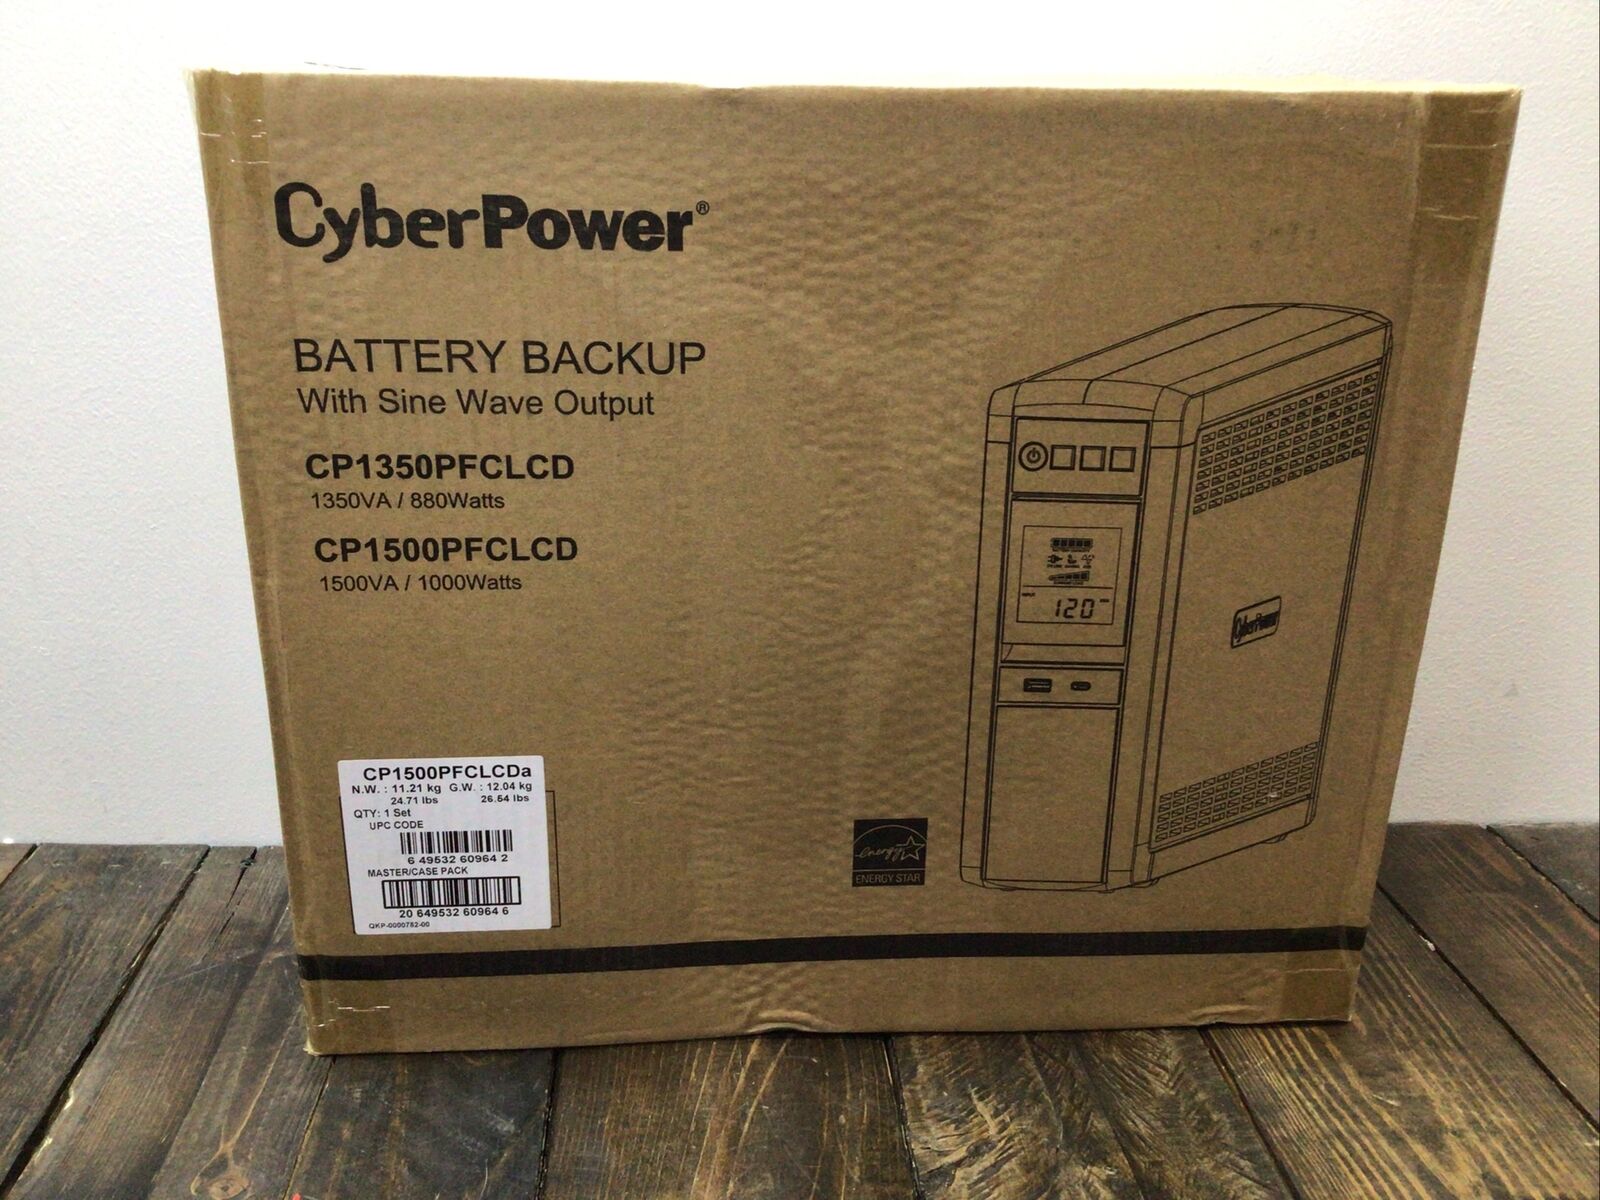 Cyber Power Battery Backup W/Sine Wave Output (CP1500PFCLCDa) - NEW SEALED